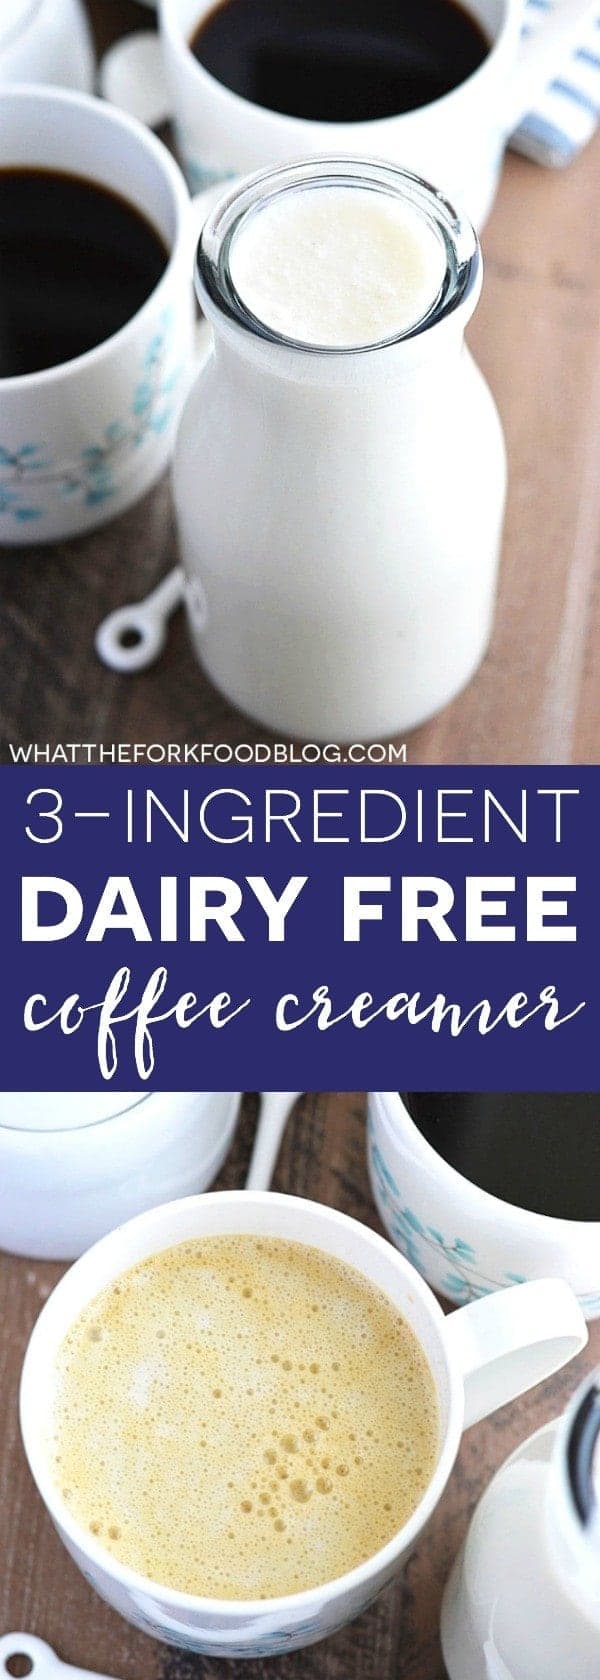 3-Ingredient Dairy Free Coffee Creamer from What The Fork Food Blog | whattheforkfoodblog.com